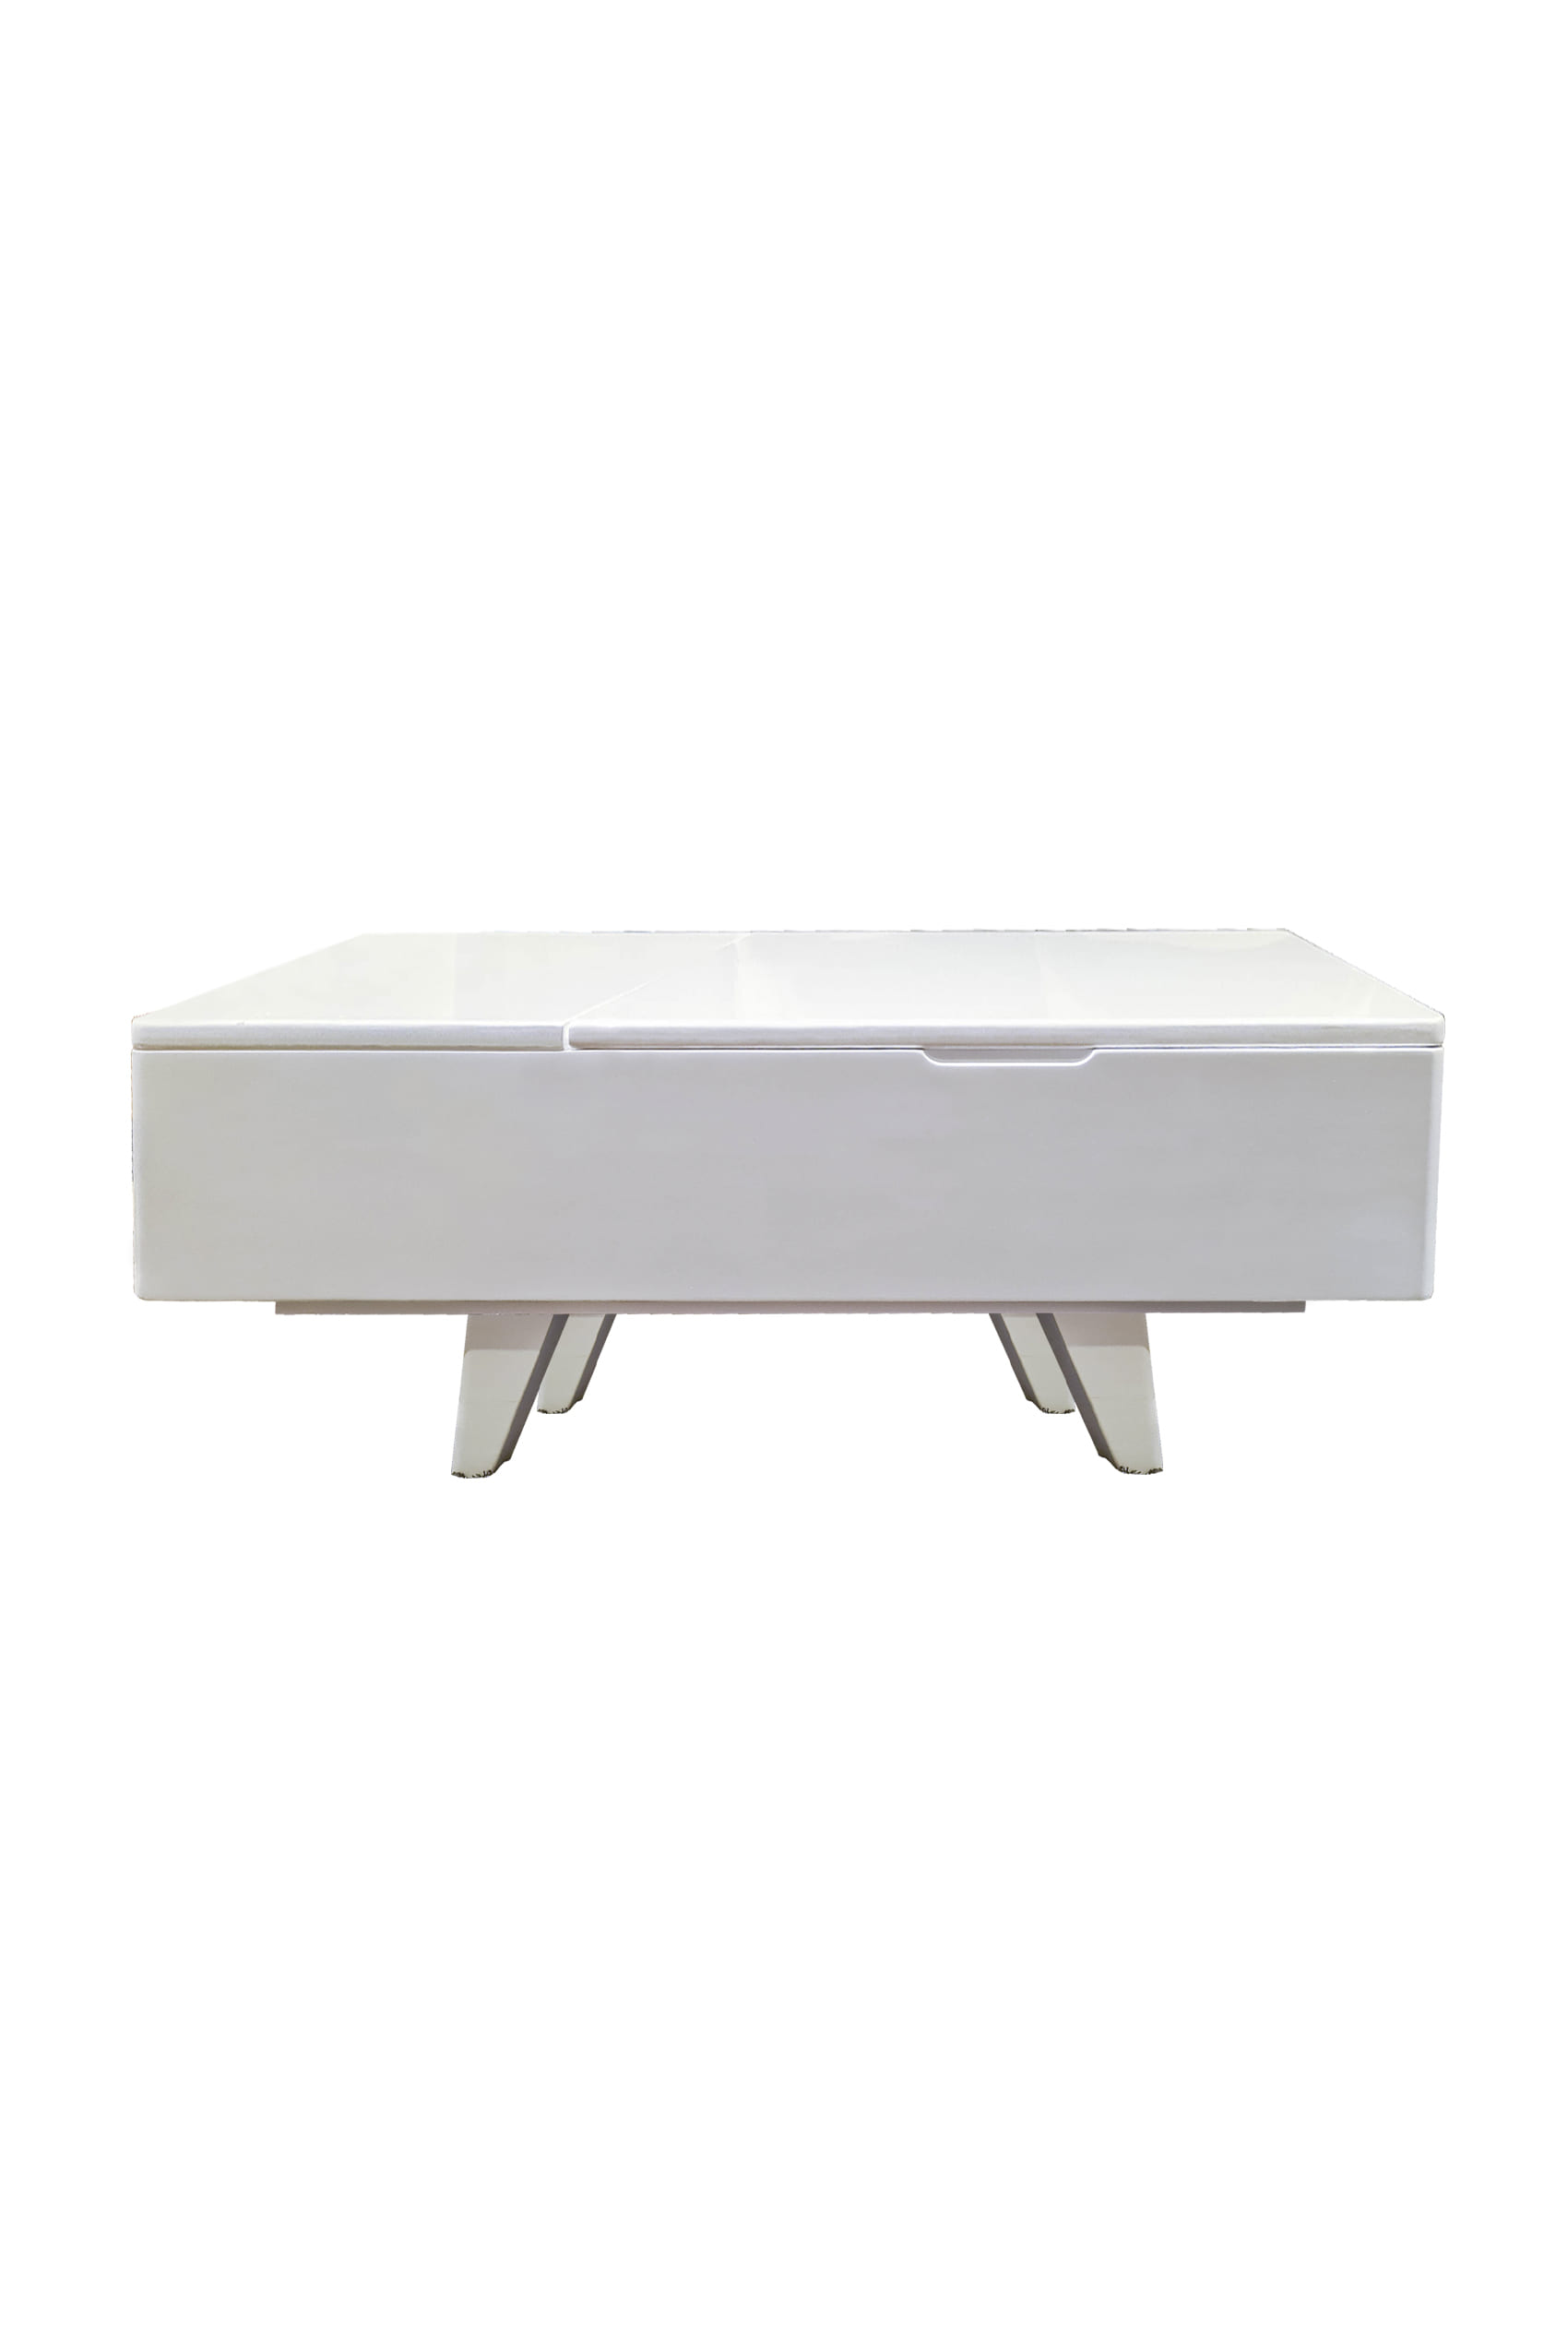 Double High White Coffee Table